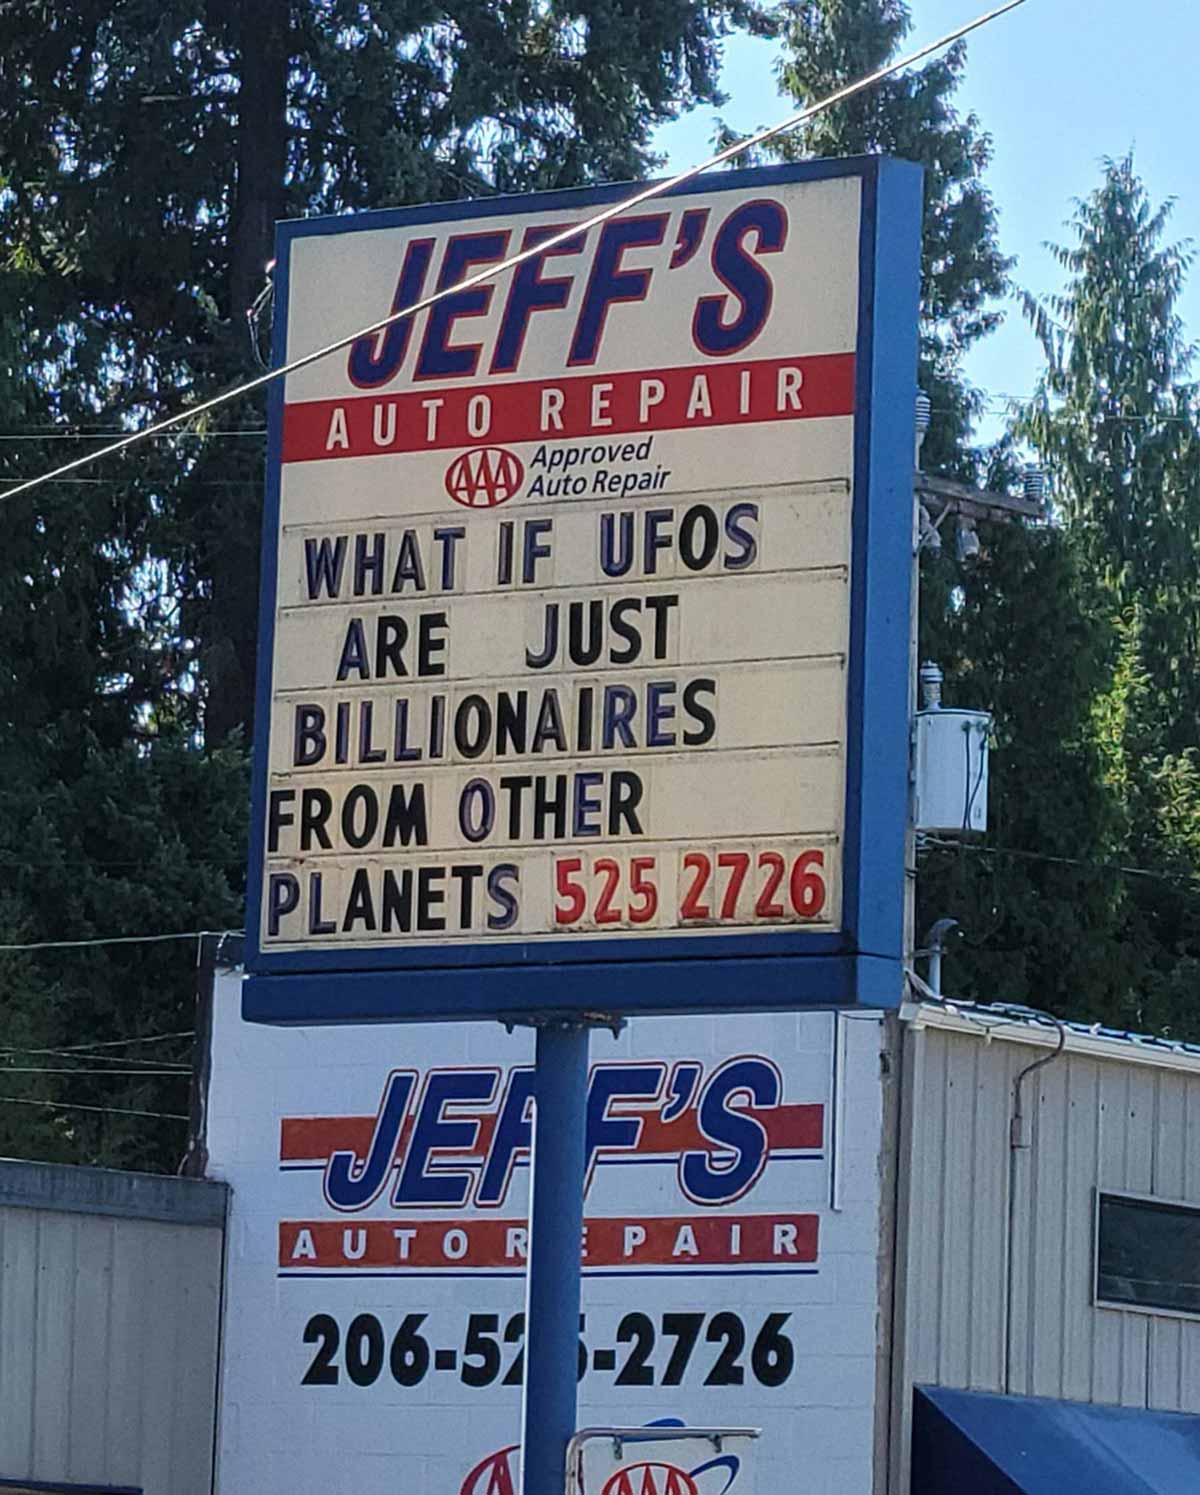 Local mechanic always has a funny sign